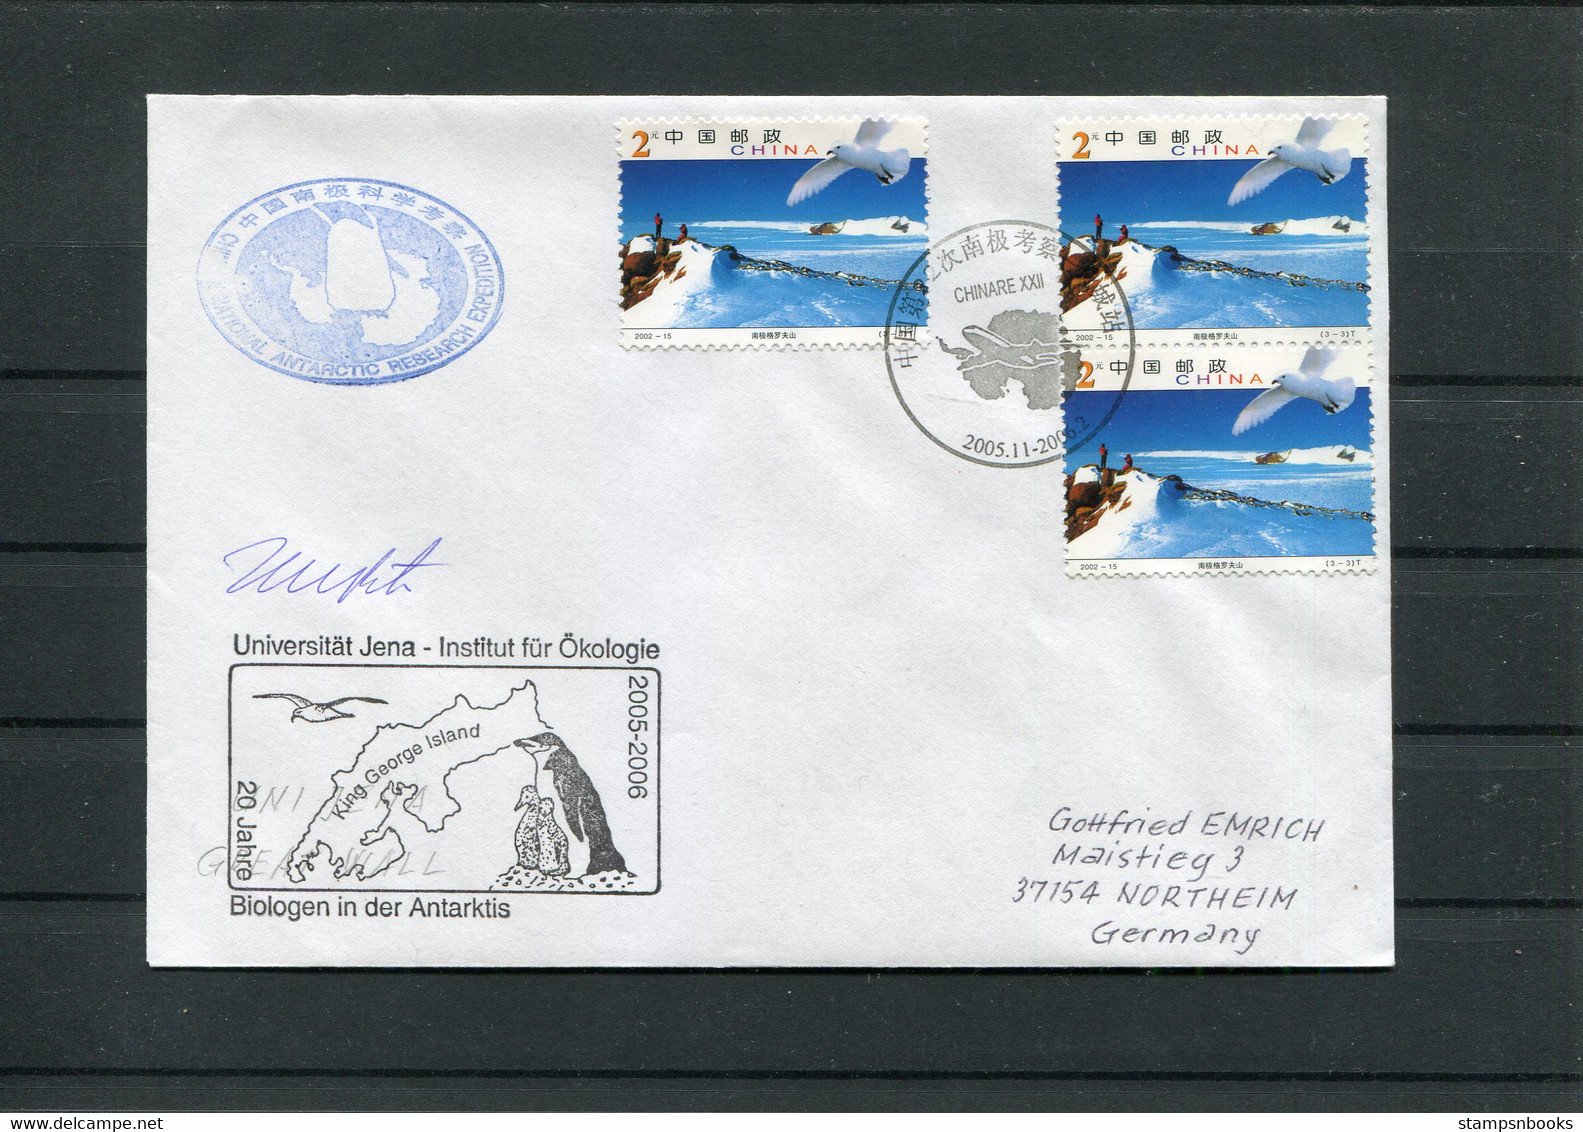 2005 China / Germany Jena University Ecology Expedition CHINARE Signed Penguin Antarctic King George Island Cover - Covers & Documents